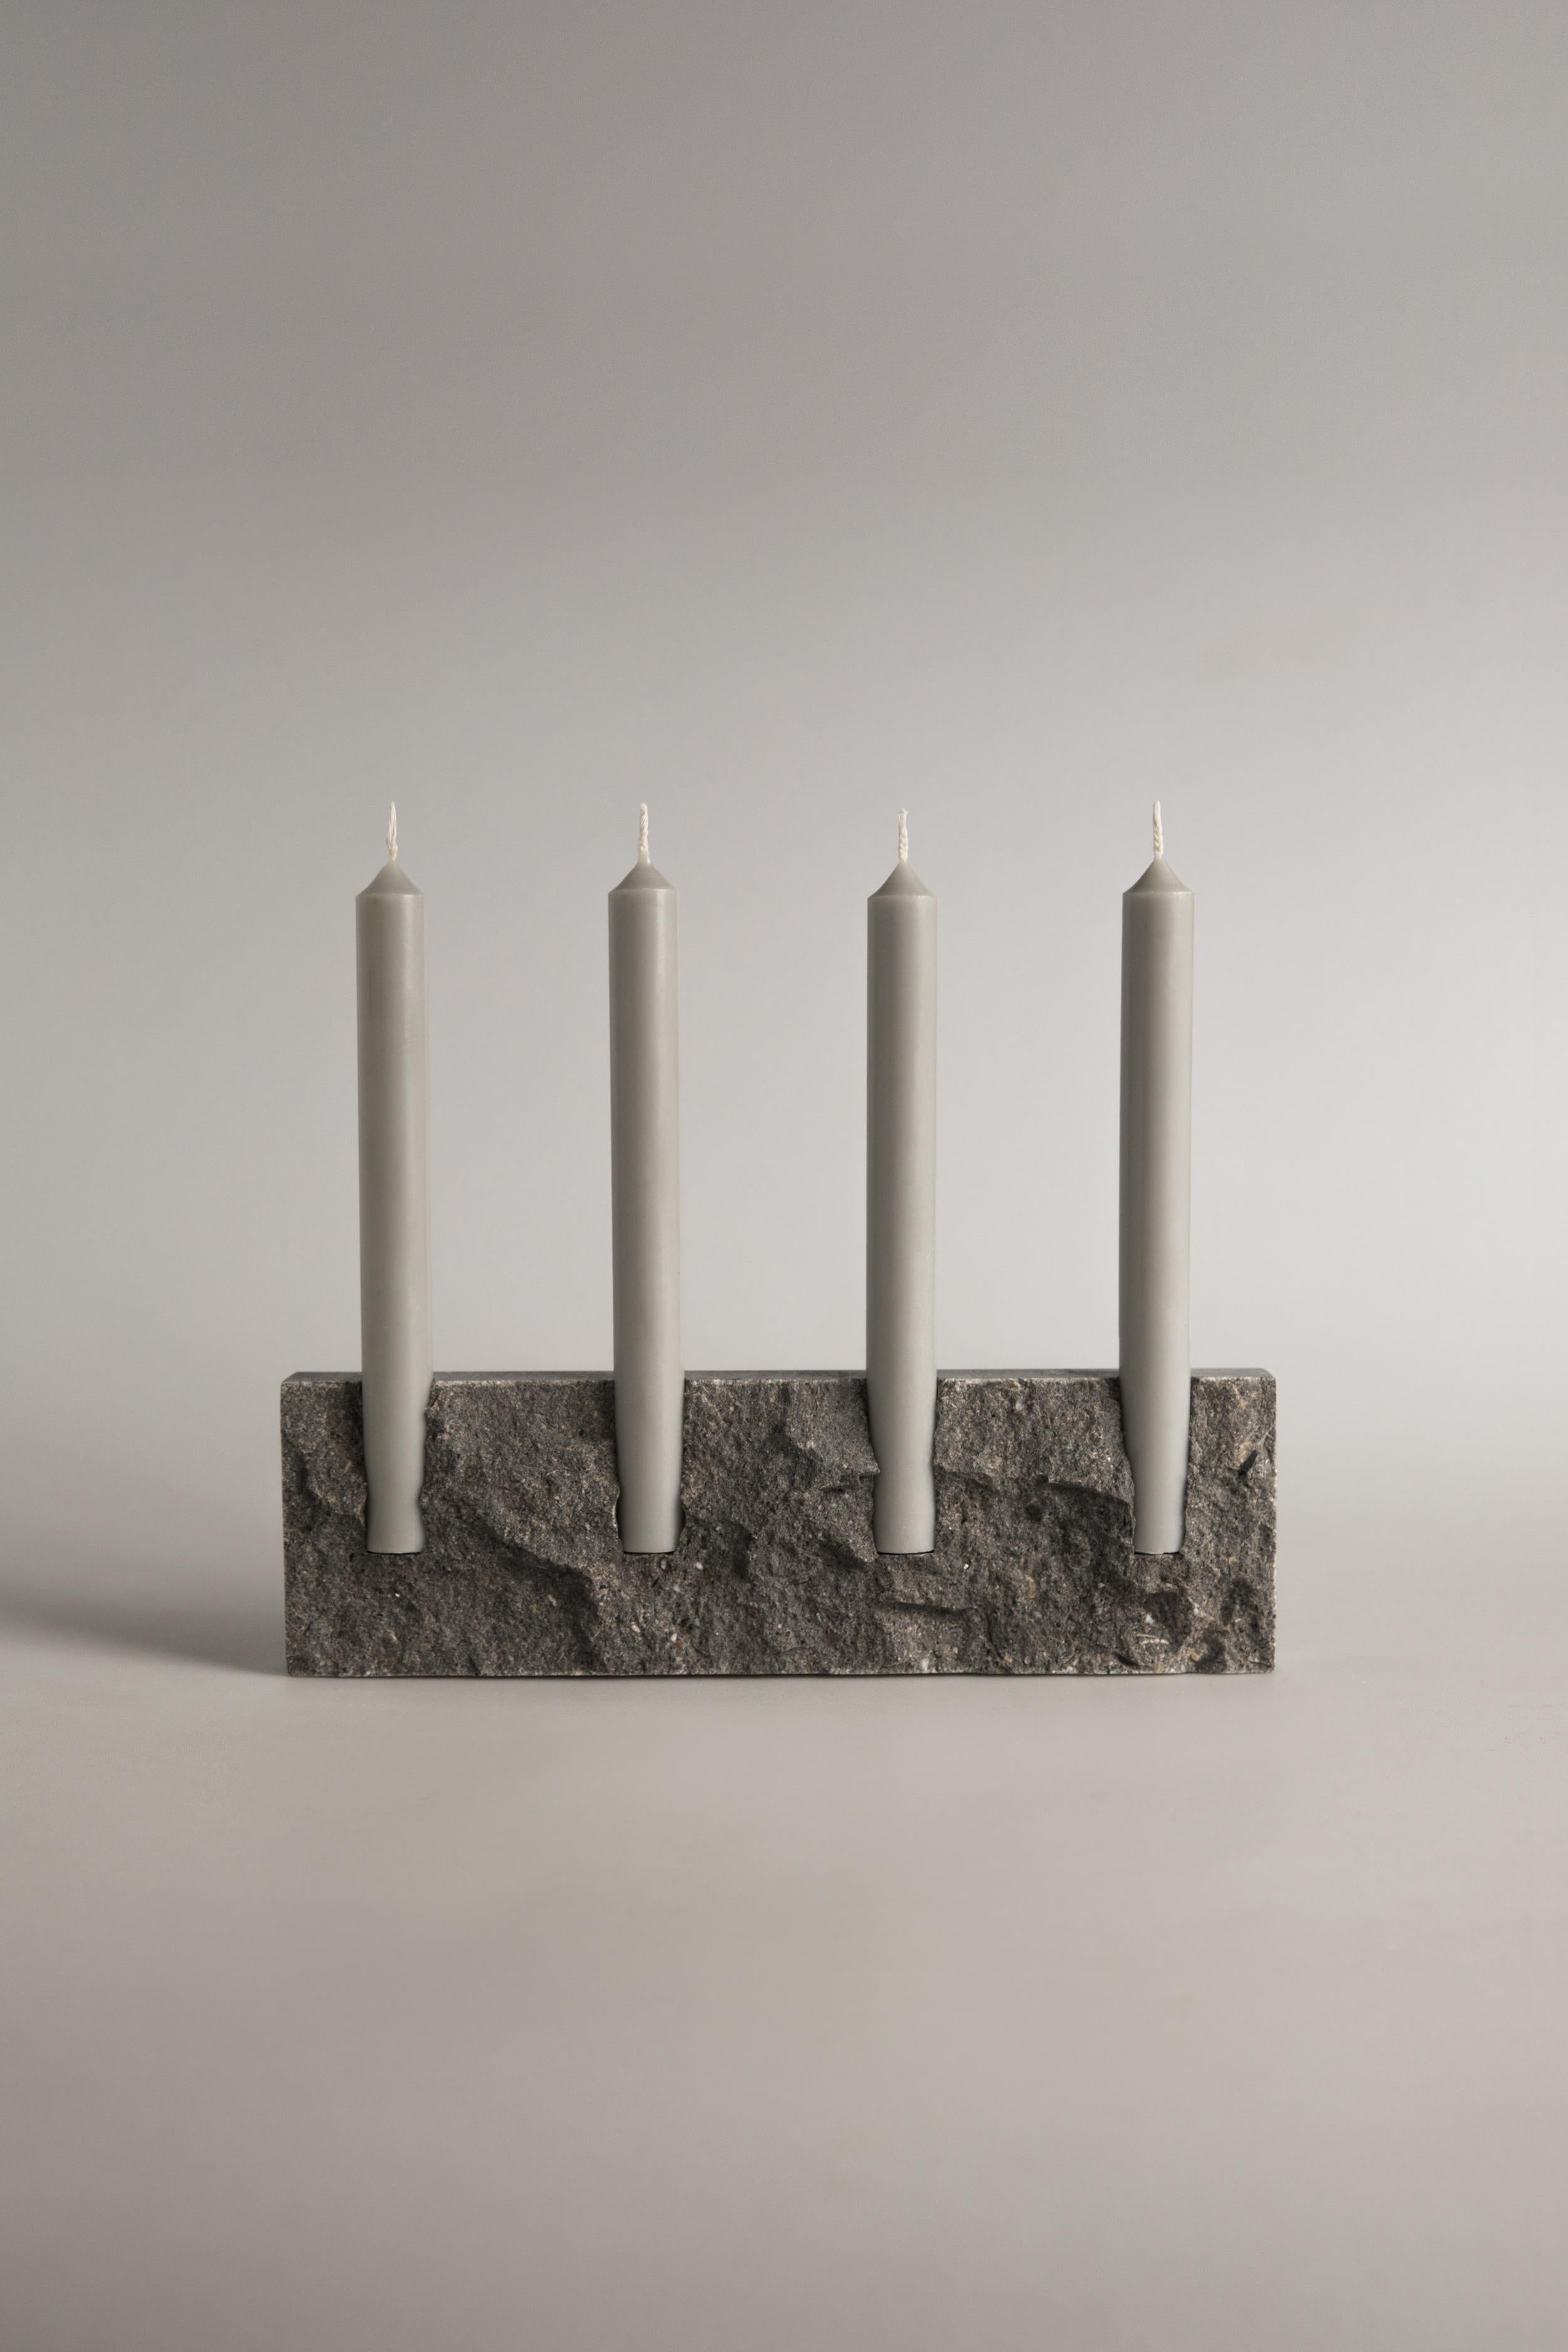 Handcrafted candle holder Sant Vicenç natural stone with rock face front (hand chipped) and smooth sides. Please note that each stone is unique and reacts differently, therefore important variations in colour, shape and texture occur. 

Snug